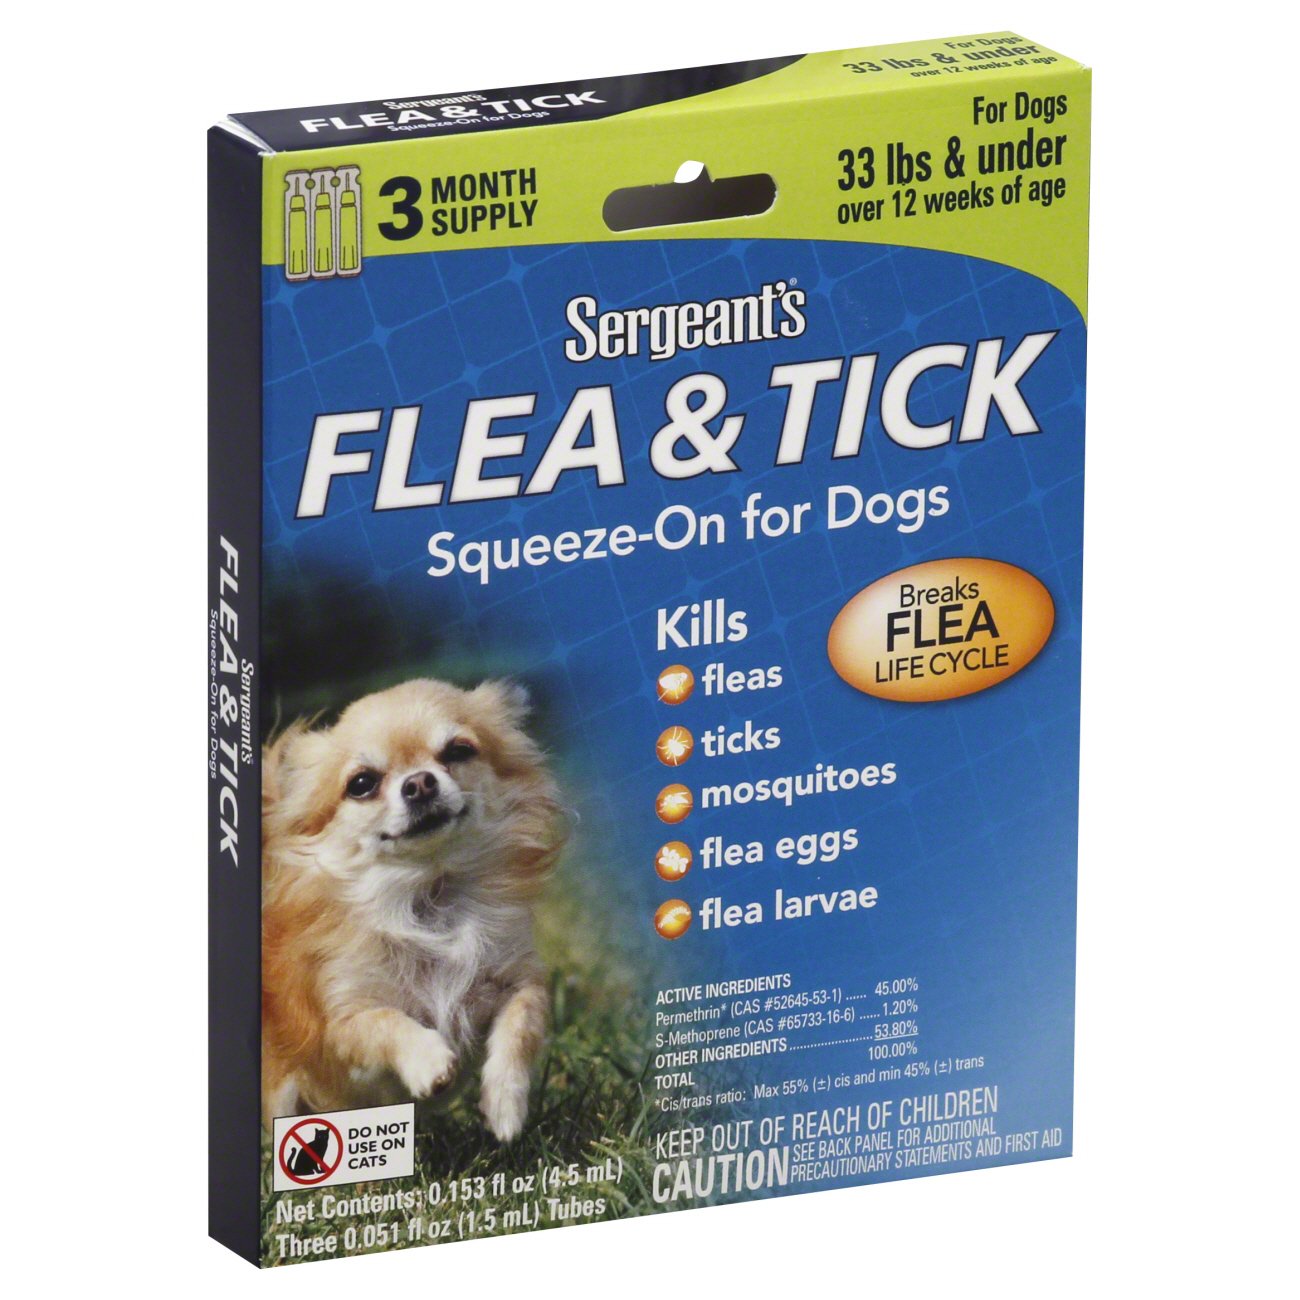 Sergeant's Flea & Tick Squeeze-On for Dogs-New 